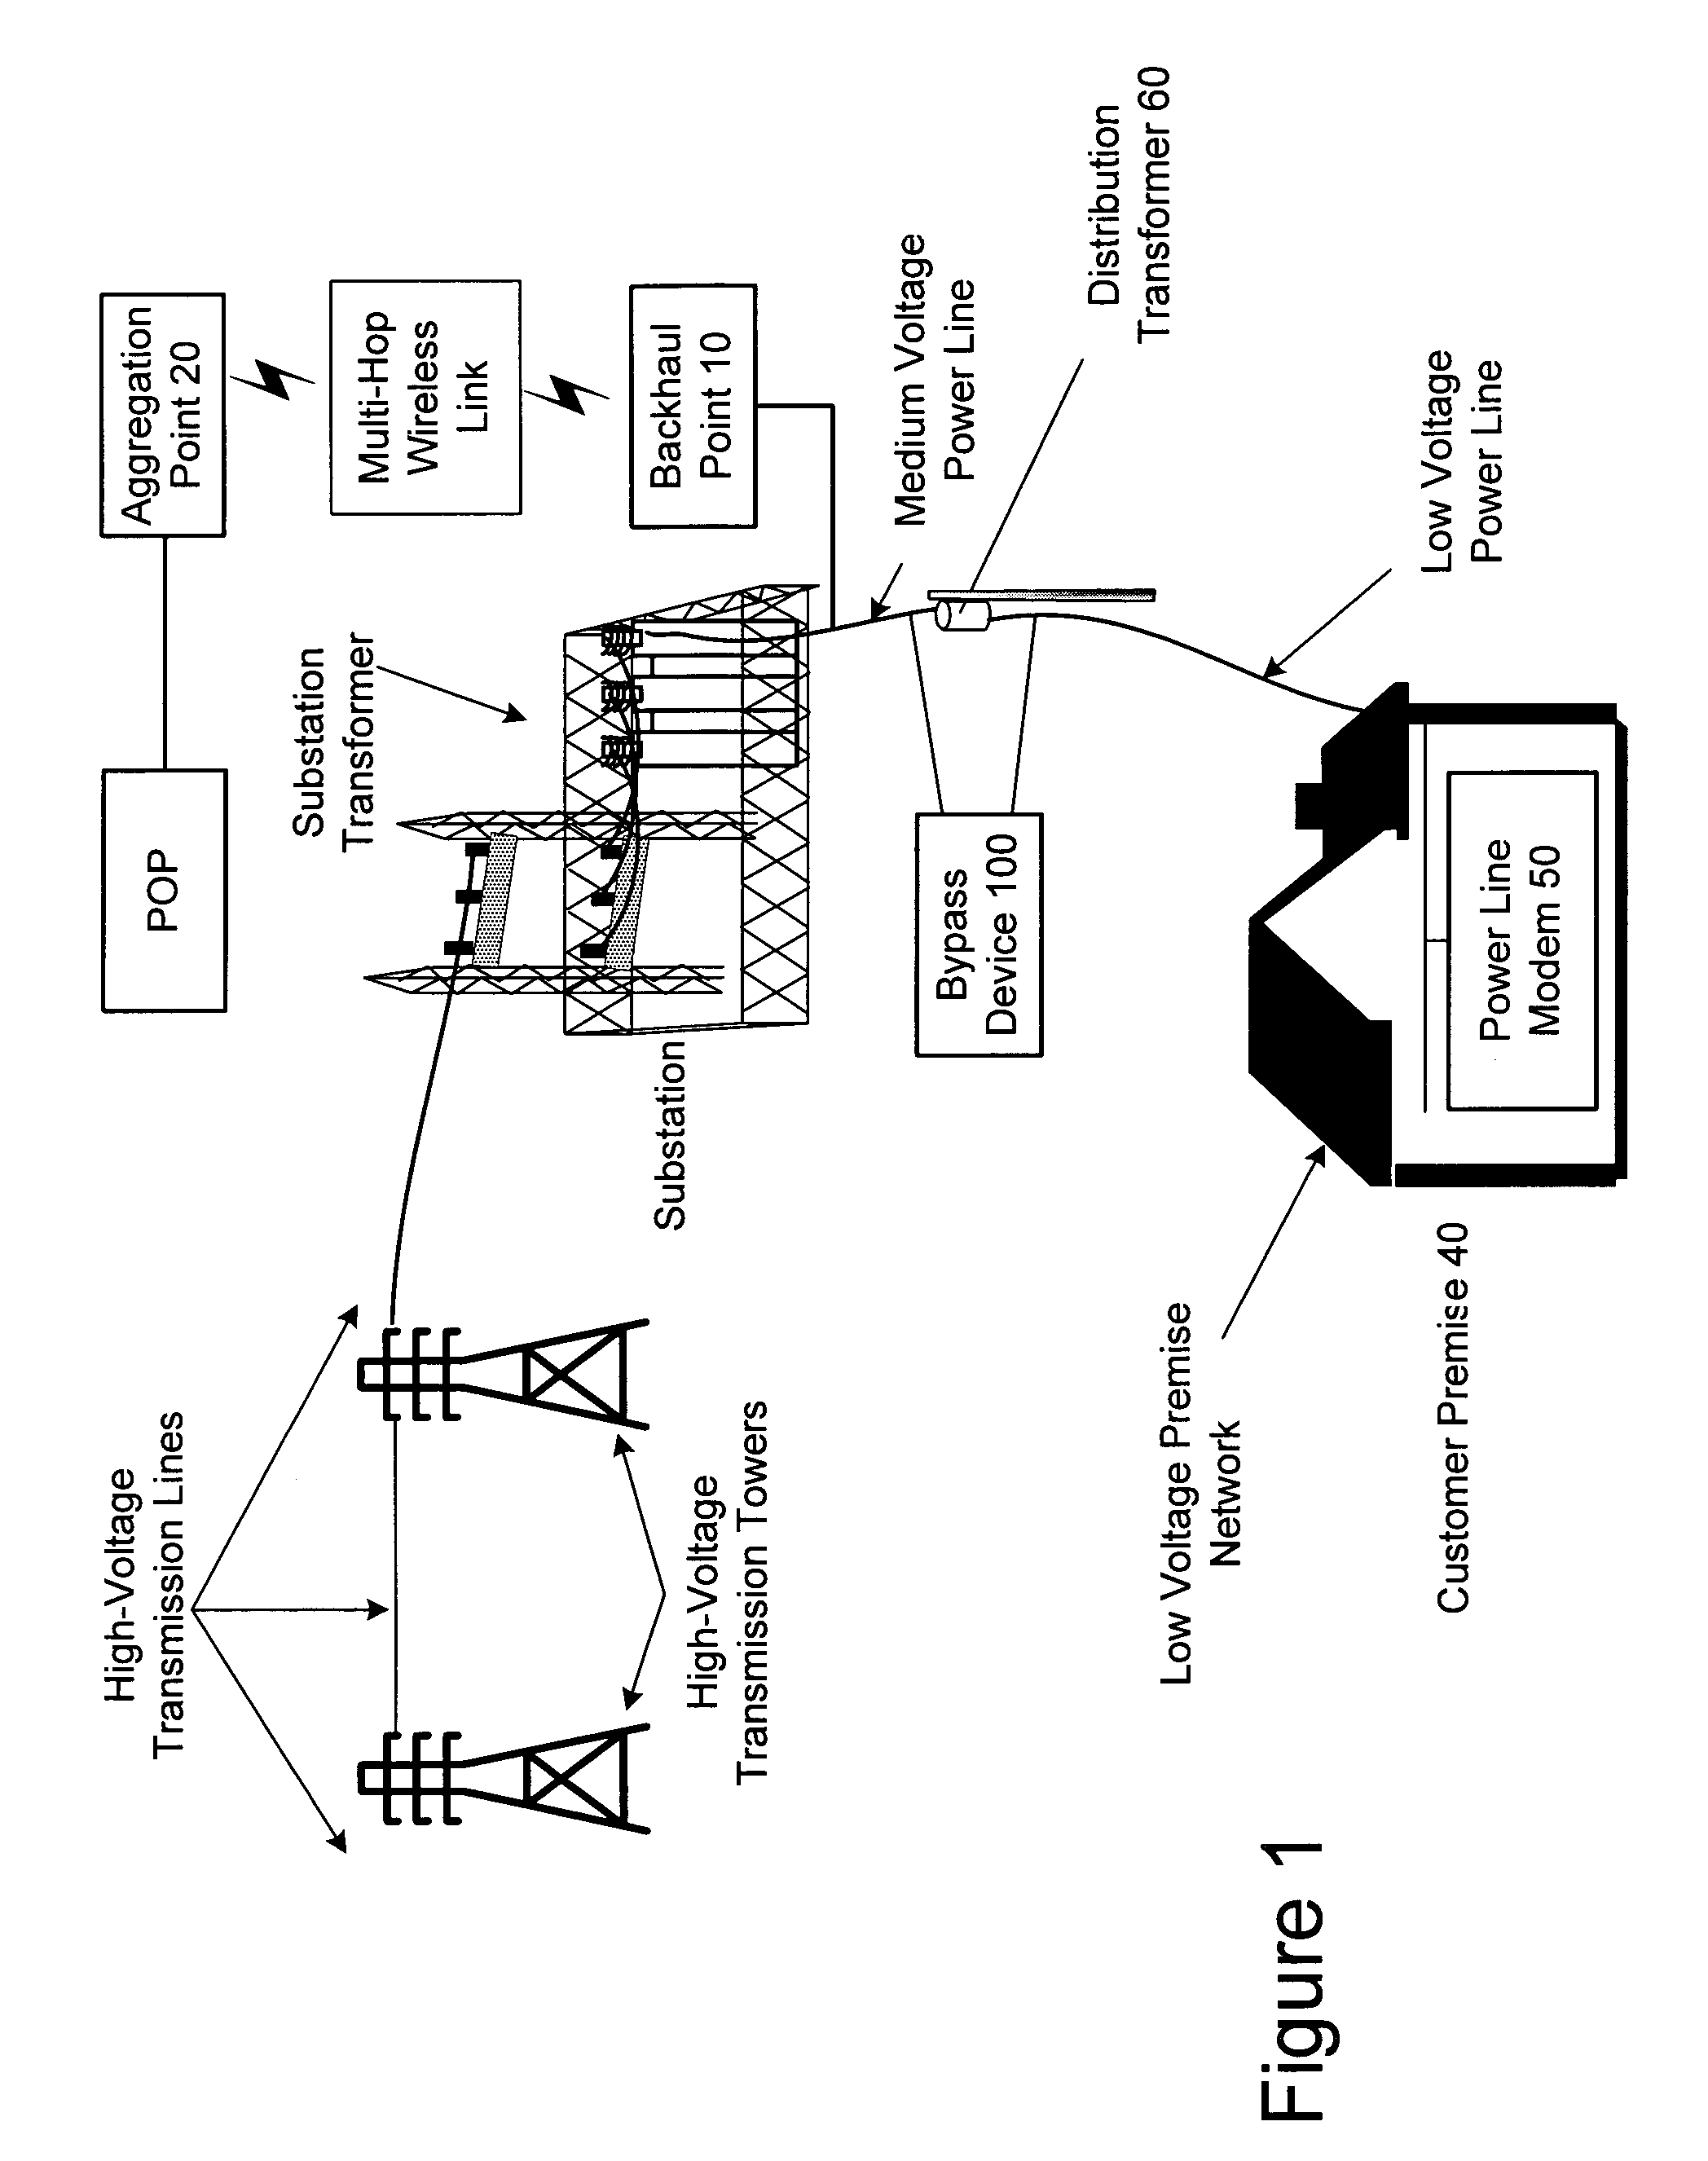 Wireless link for power line communications system